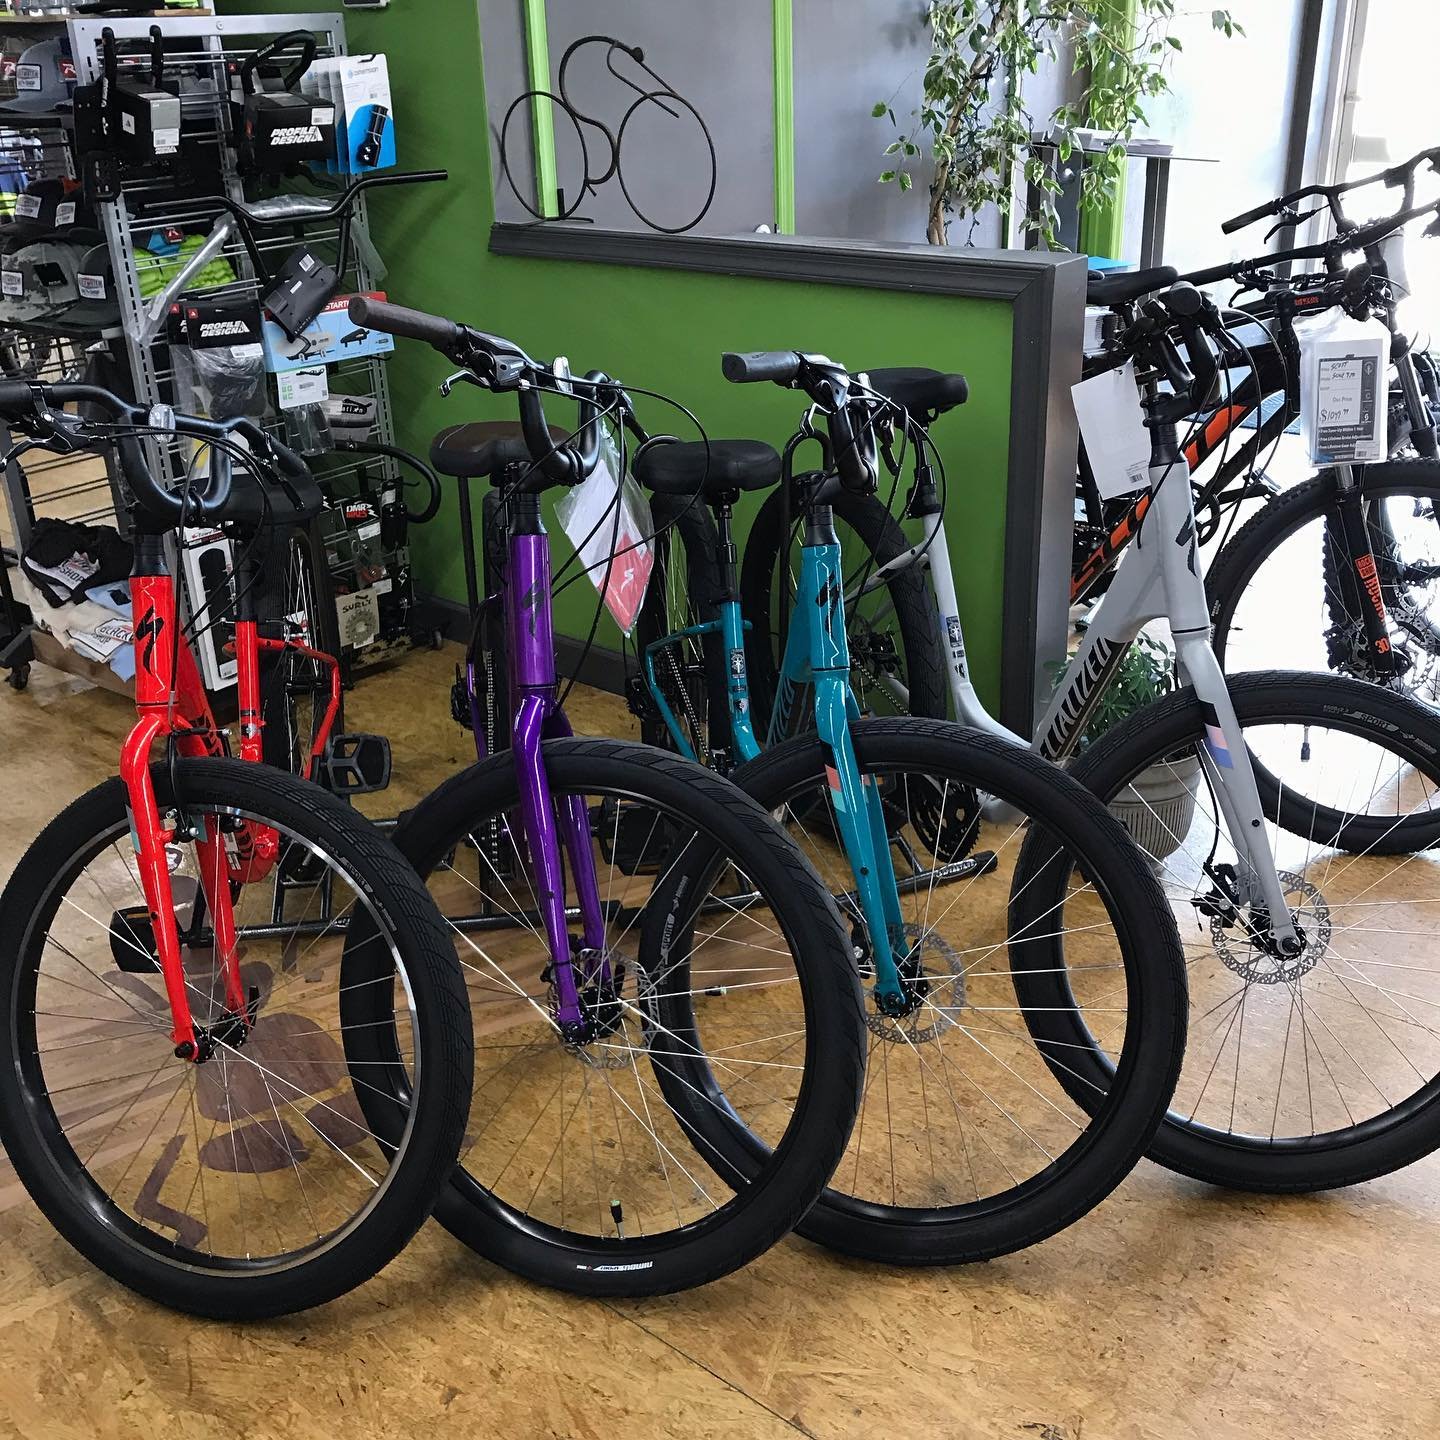 online bicycle store